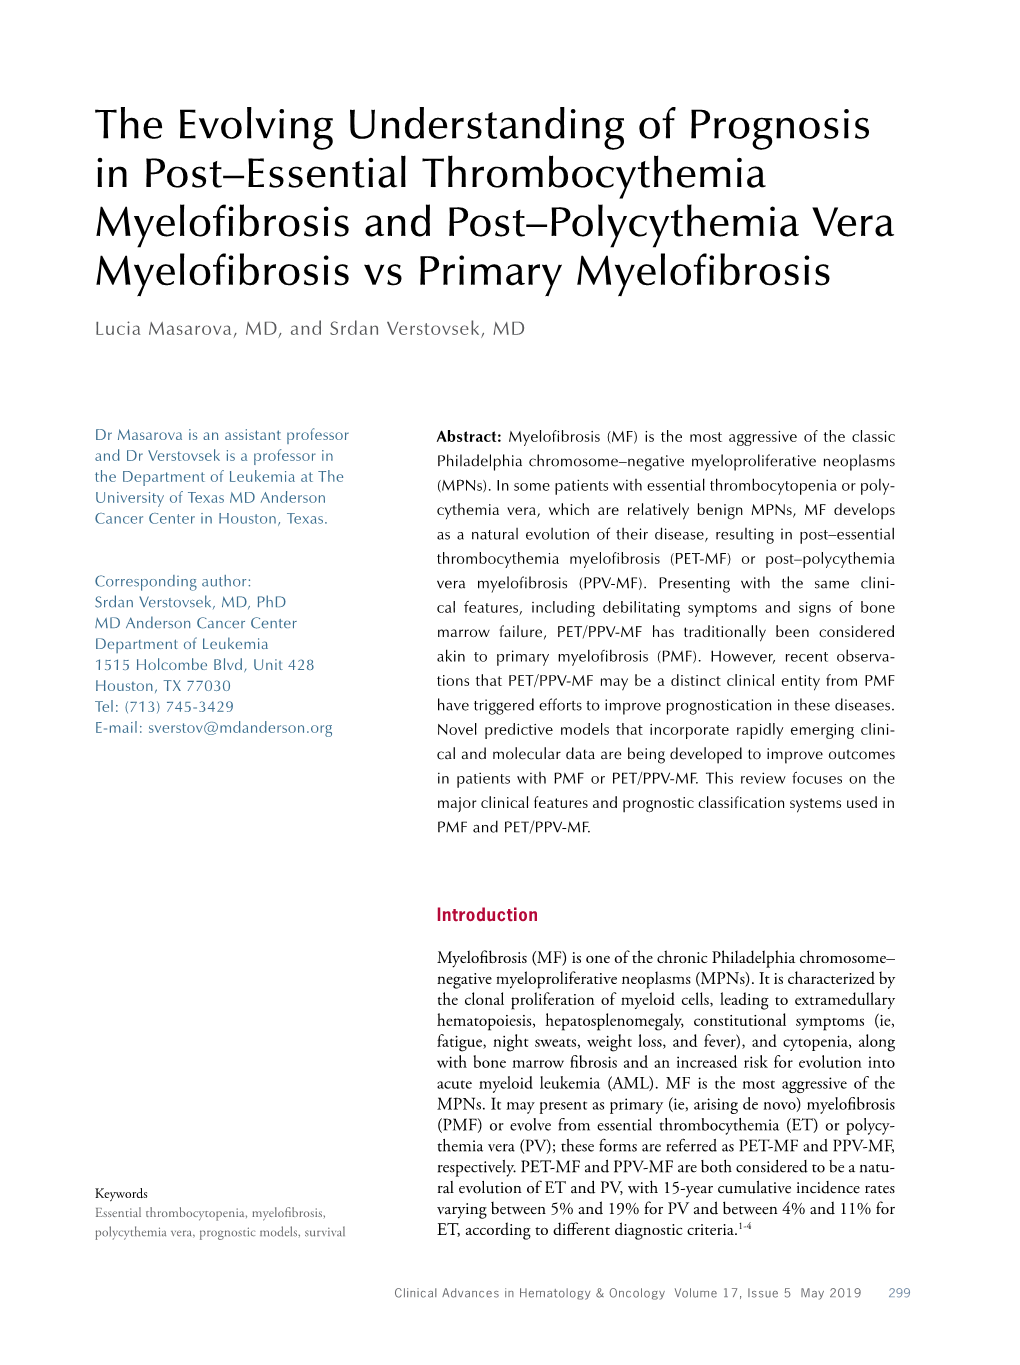 The Evolving Understanding of Prognosis in Post–Essential Thrombocythemia Myelofibrosis and Post–Polycythemia Vera Myelofibrosis Vs Primary Myelofibrosis